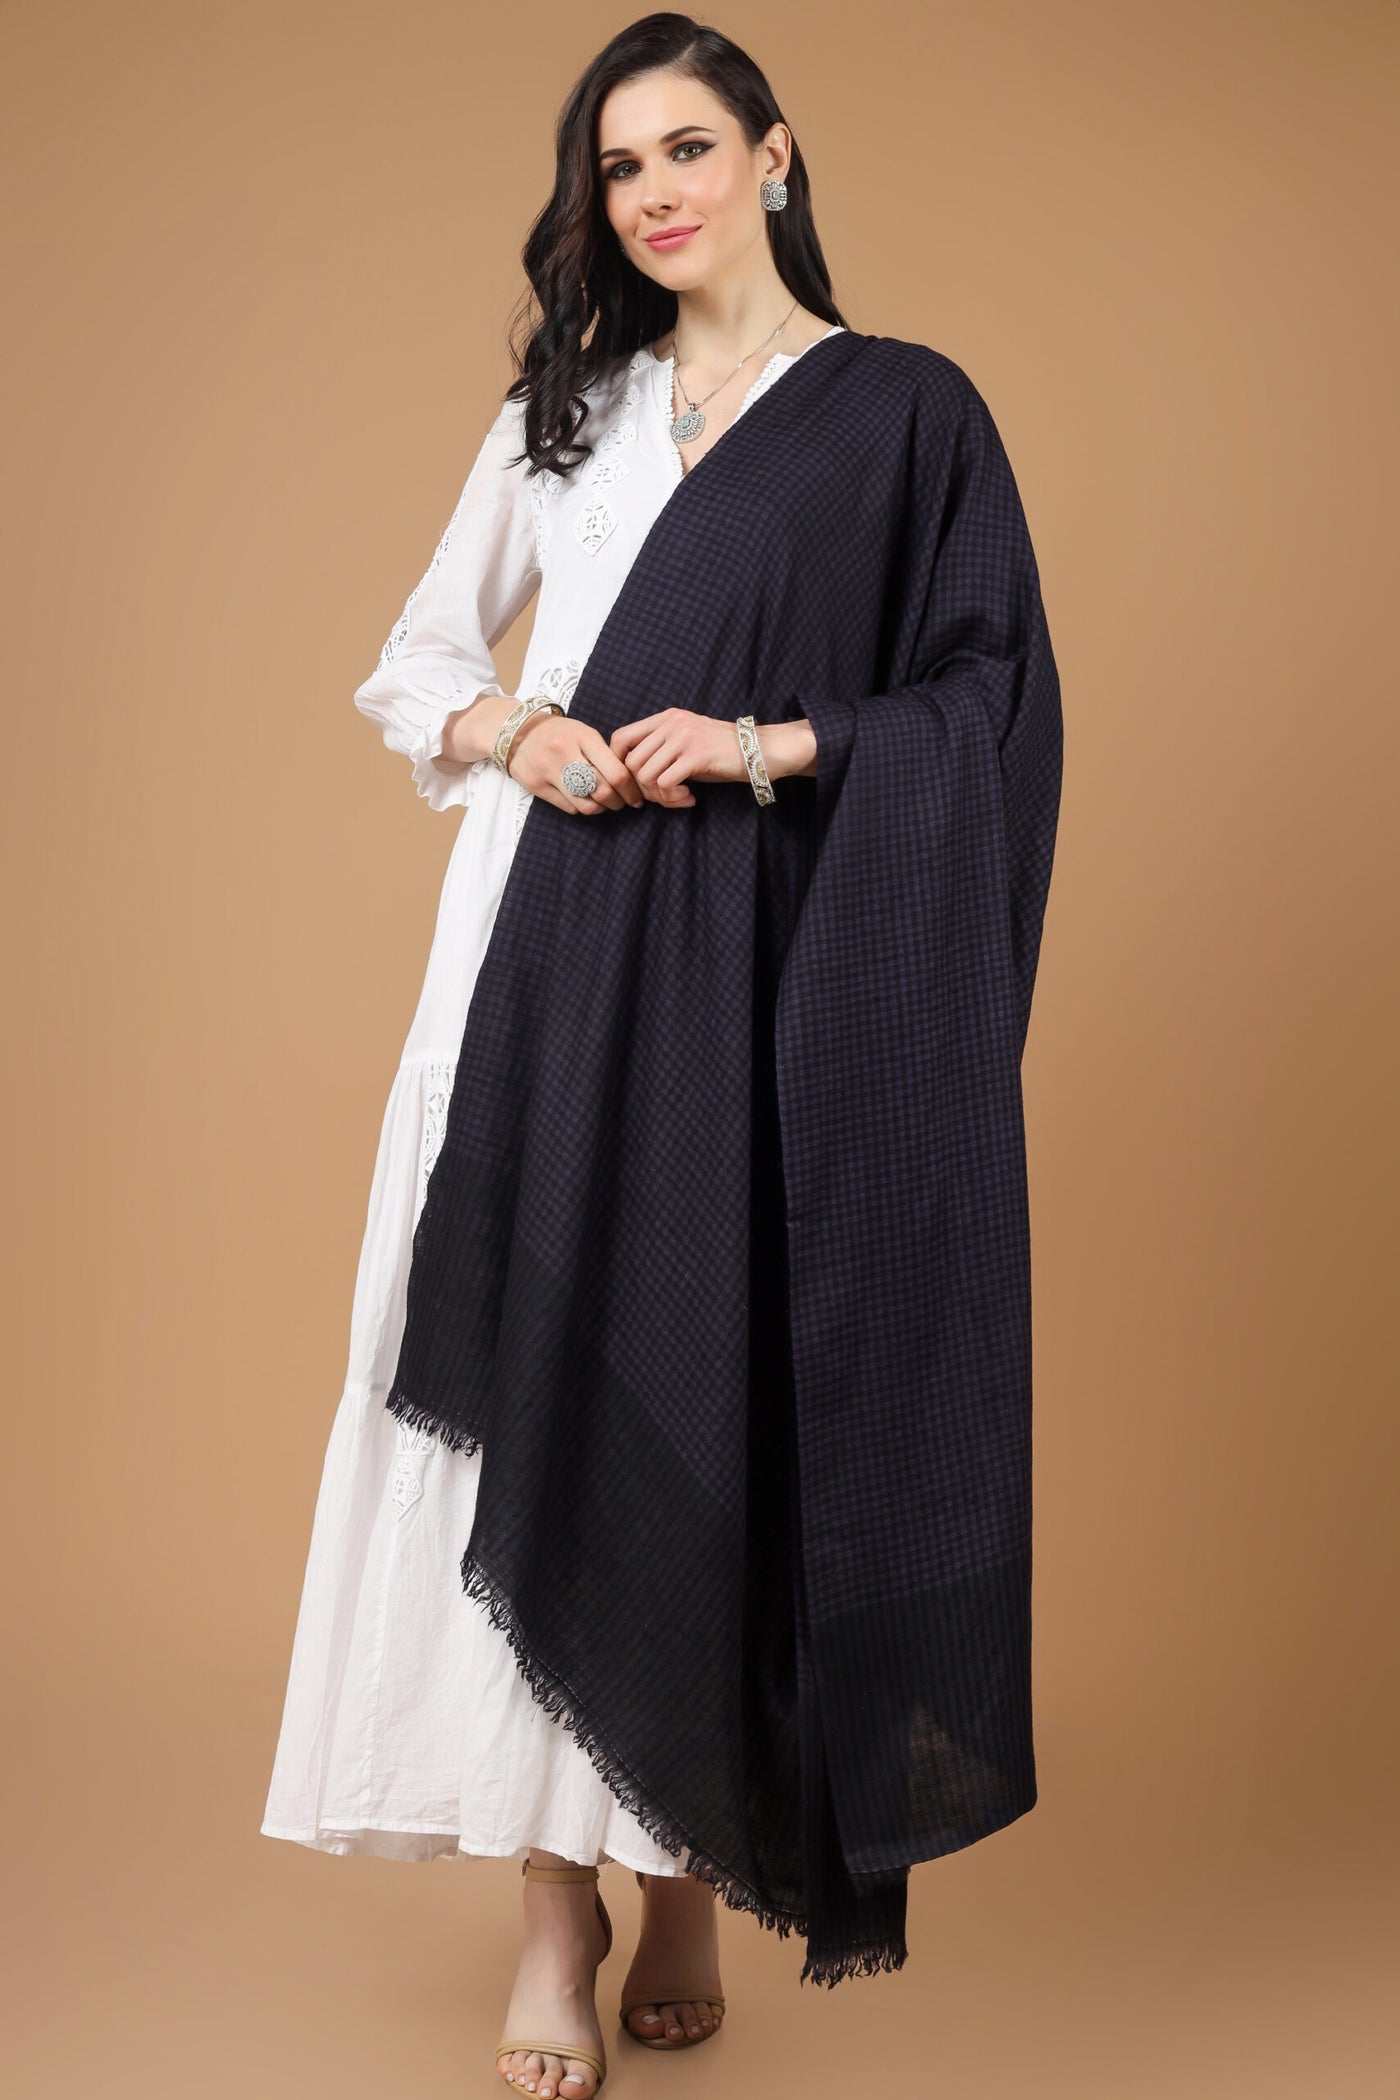  With this amazing Kashmiri pashmina stole, you can wrap yourself in luxury. It is elegantly crafted in a multi-check pattern with a blend of purple and black, and it features lovely embroidery and gorgeous designs. The handmade nature of this designer pashmina stole guarantees its warmth and enduring luxury .